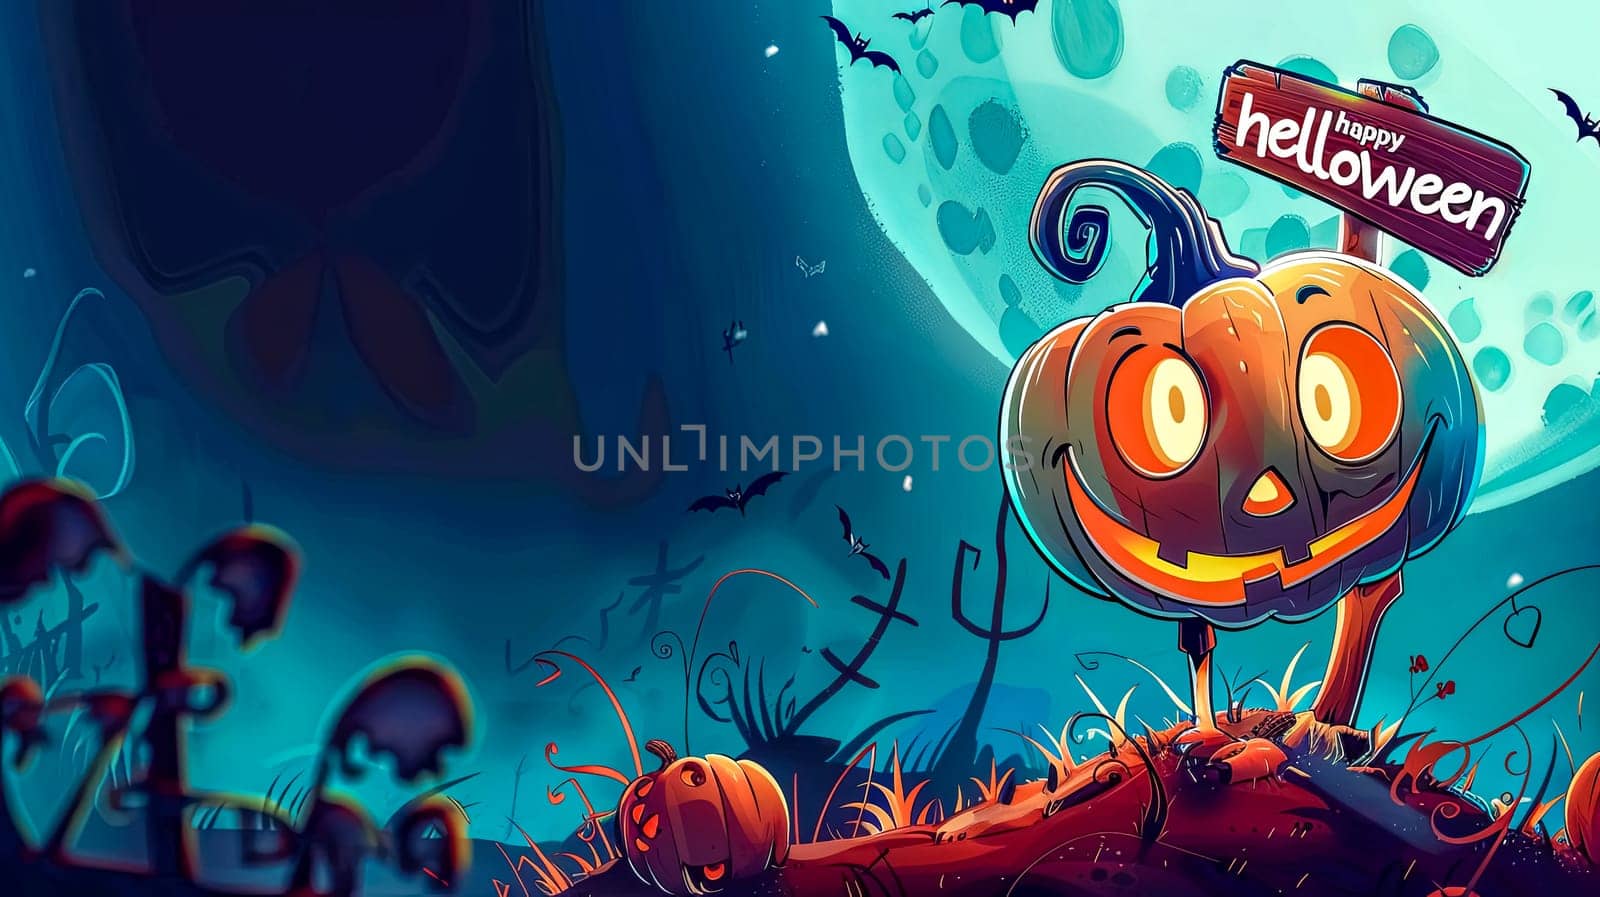 Vibrant illustration of a smiling jack-o'-lantern in a spooky fantasy setting for halloween